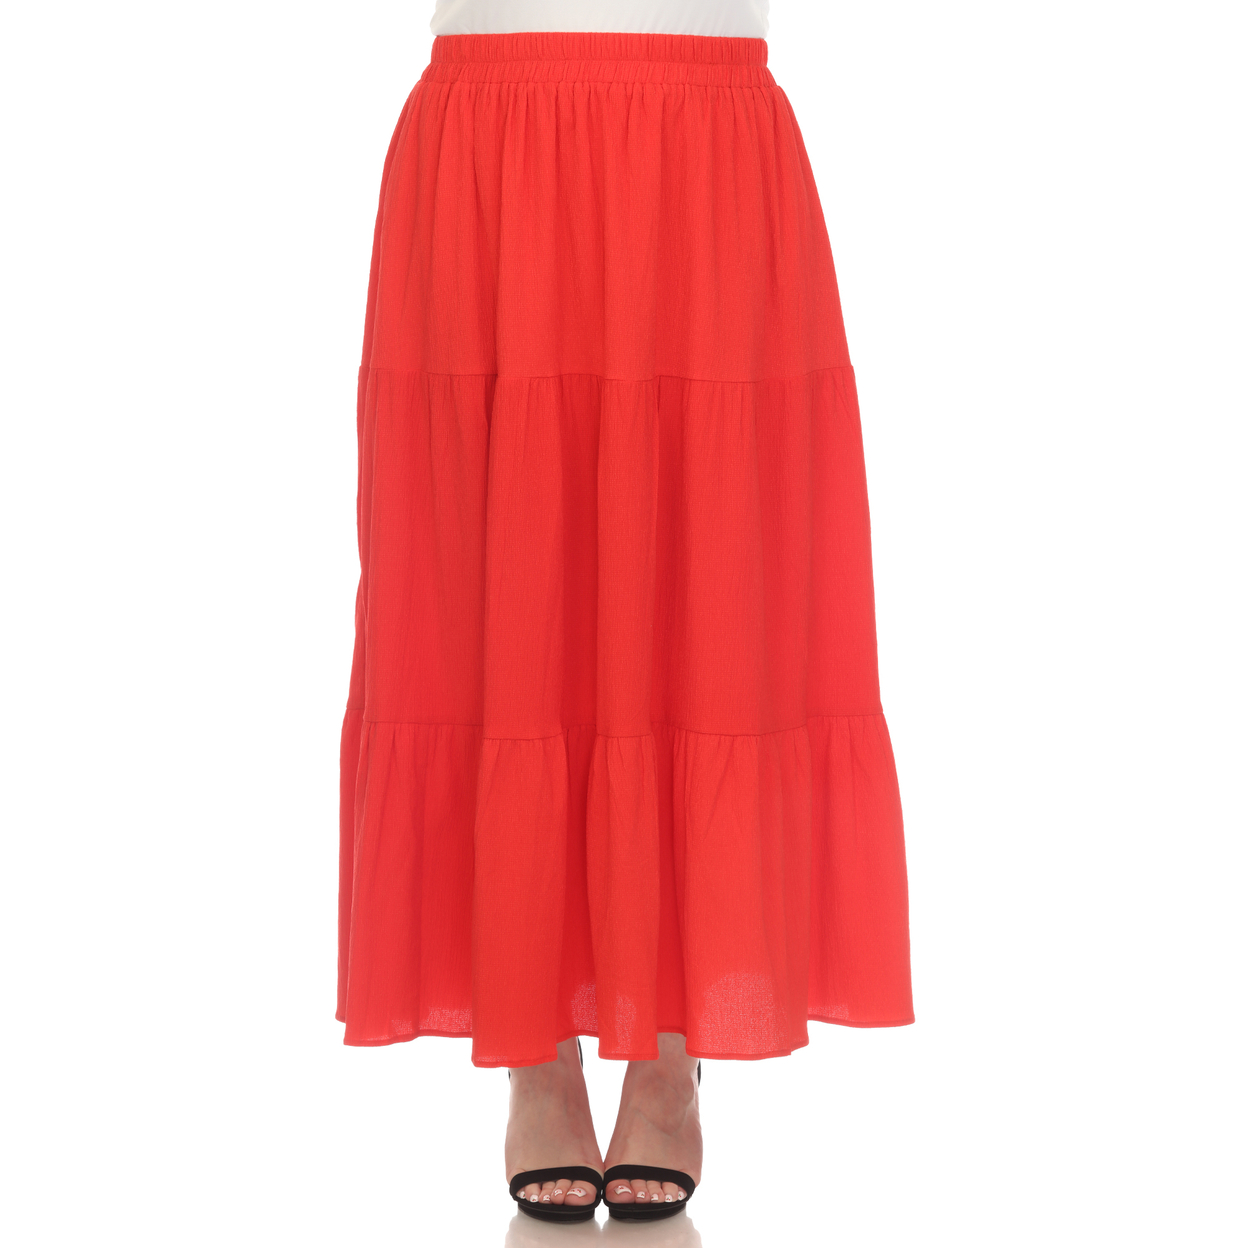 White Mark Women's Pleated Tiered Maxi Skirt - Red, 3x